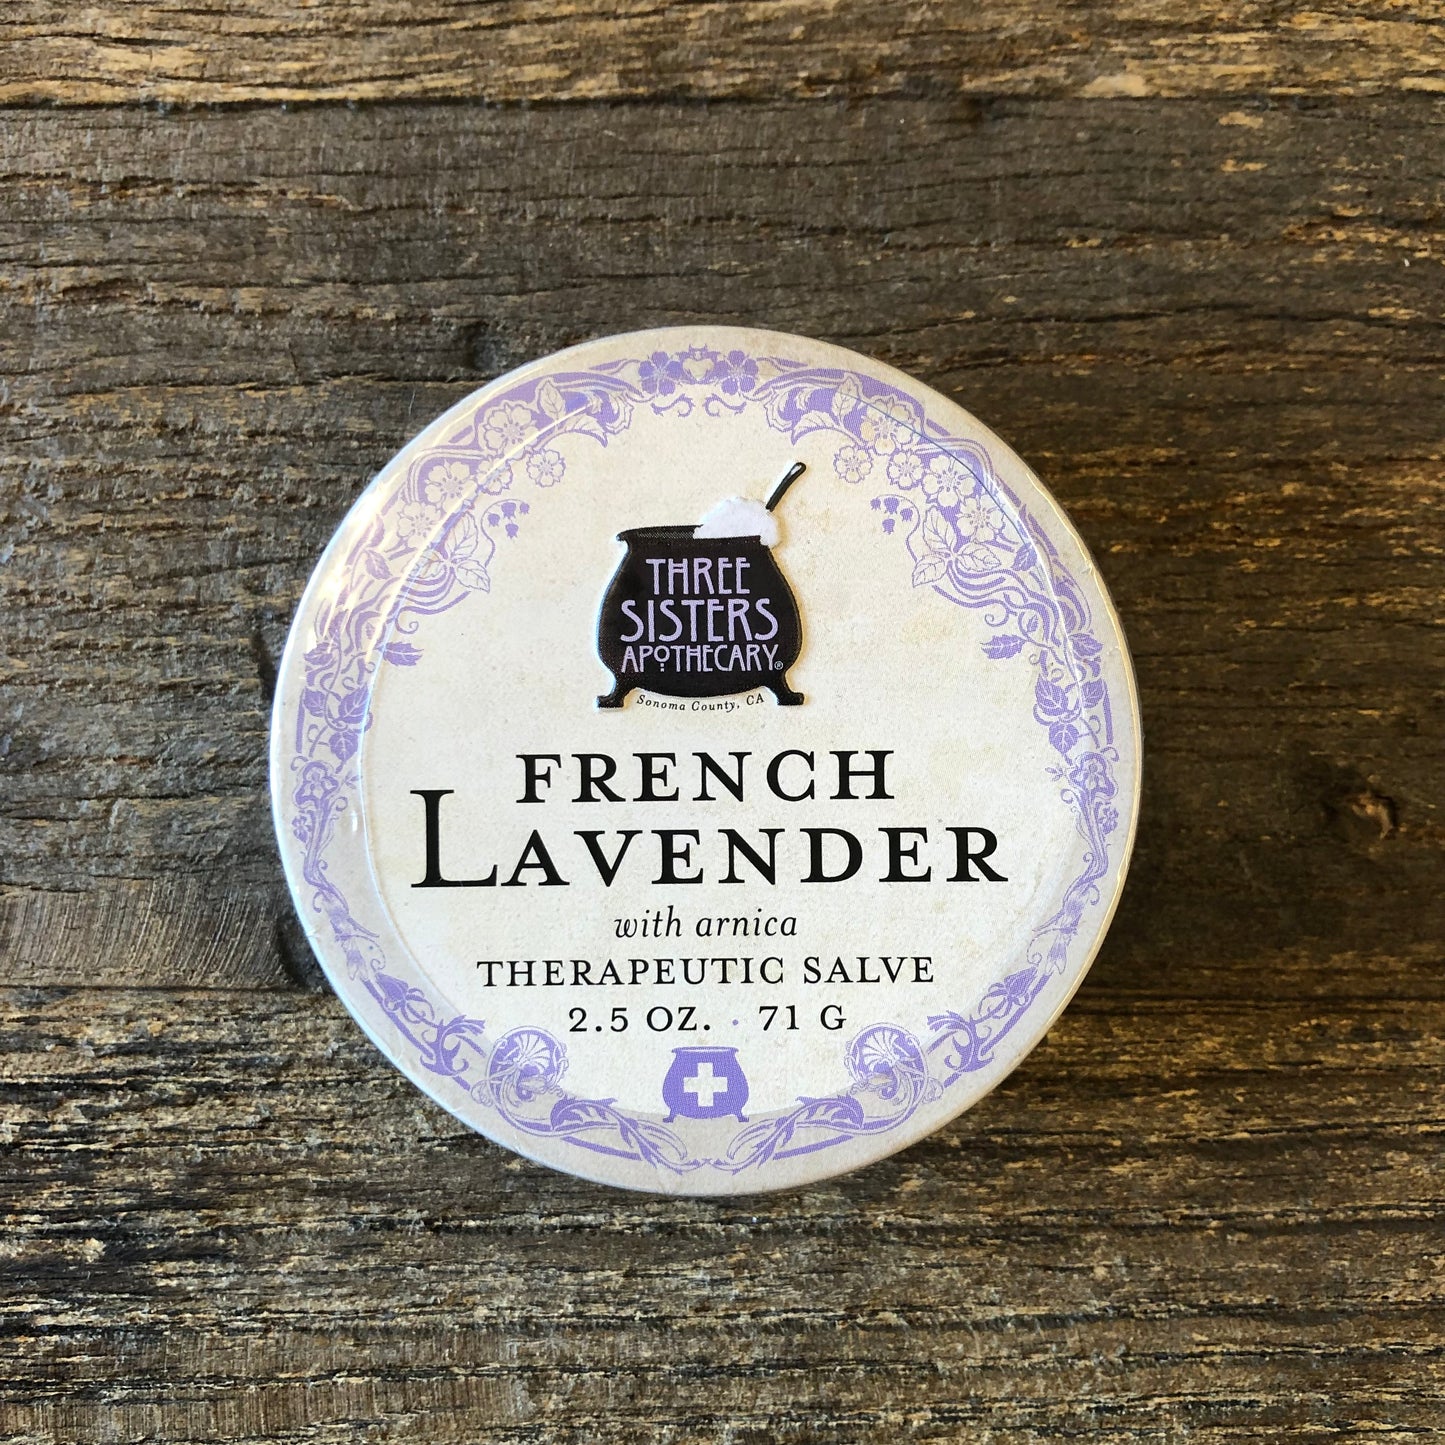 French Lavender with Armica Therapeutic Salve 2.3 oz.